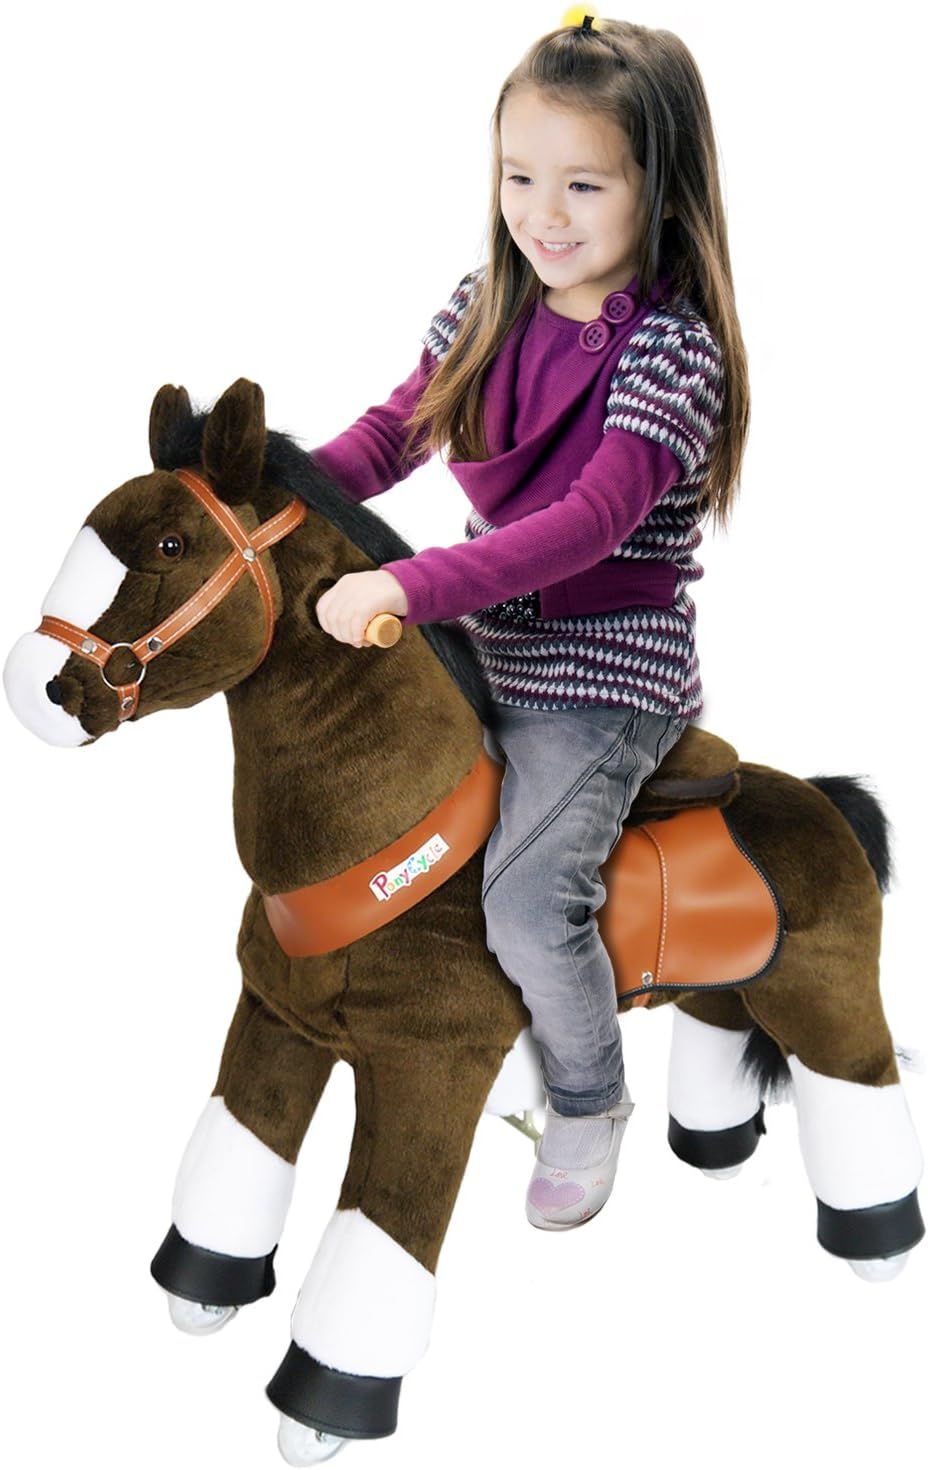 PonyCycle Pony Cycle Riding Horse Chocolate Brown with White Hoof- Med. Riding Horse | Amazon (US)